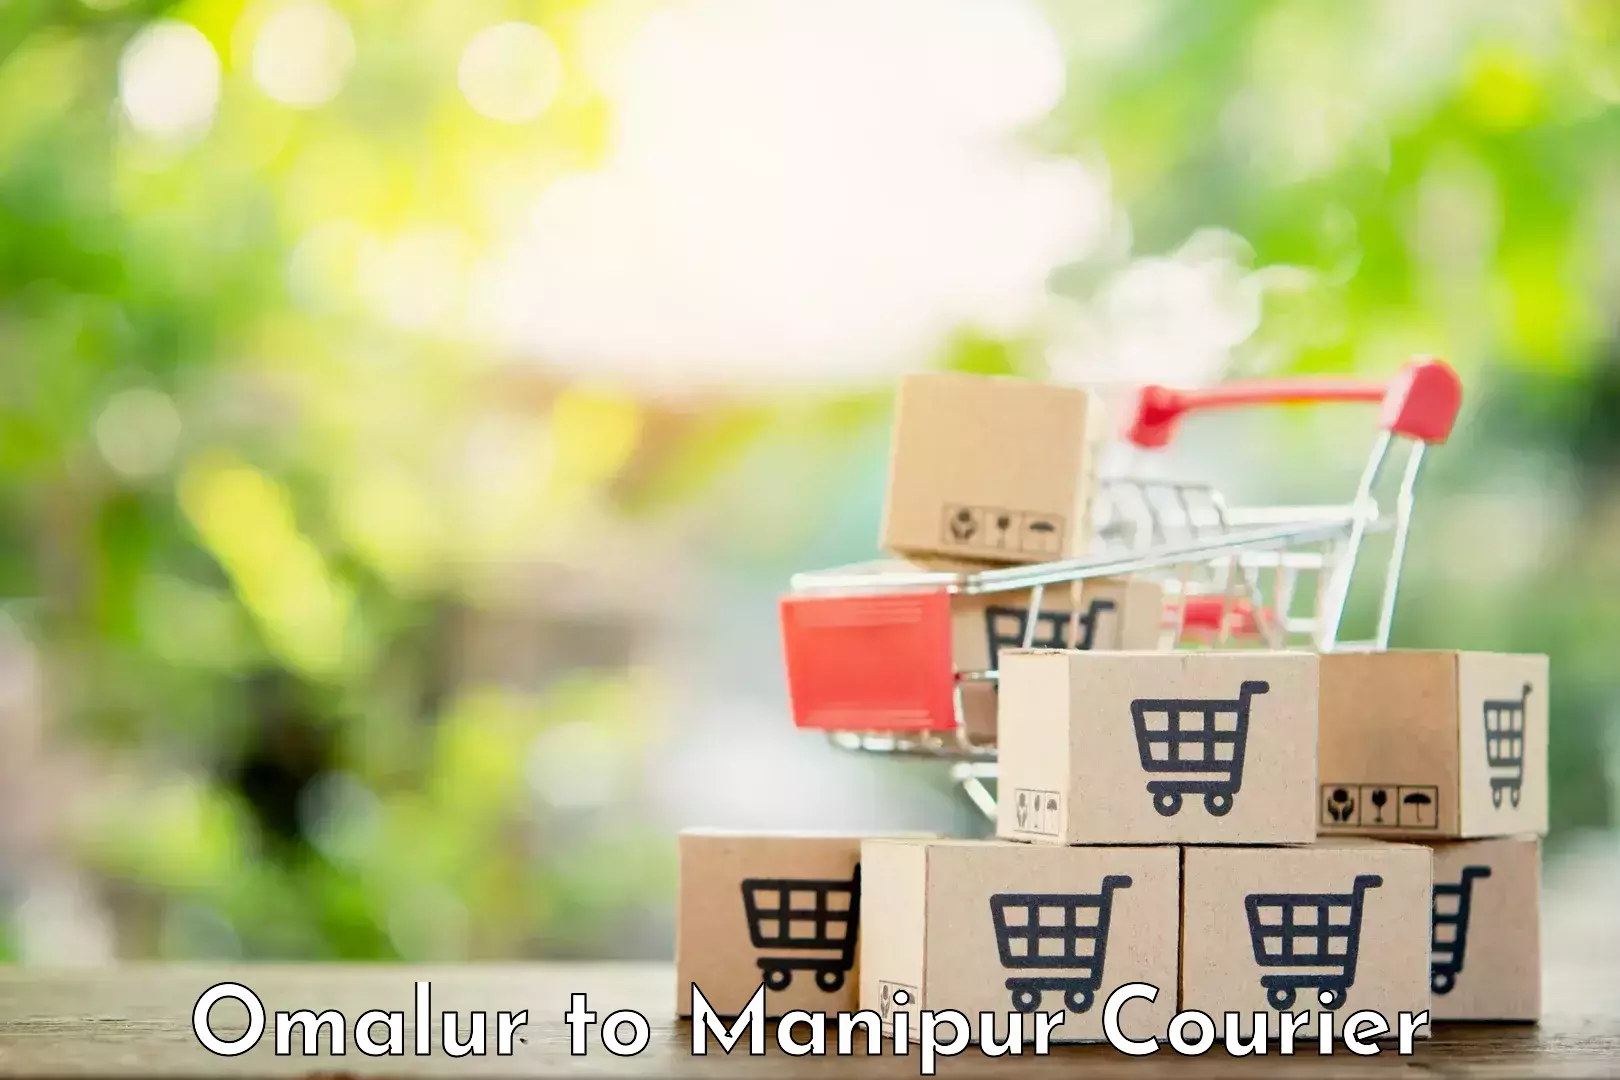 User-friendly courier app Omalur to Manipur